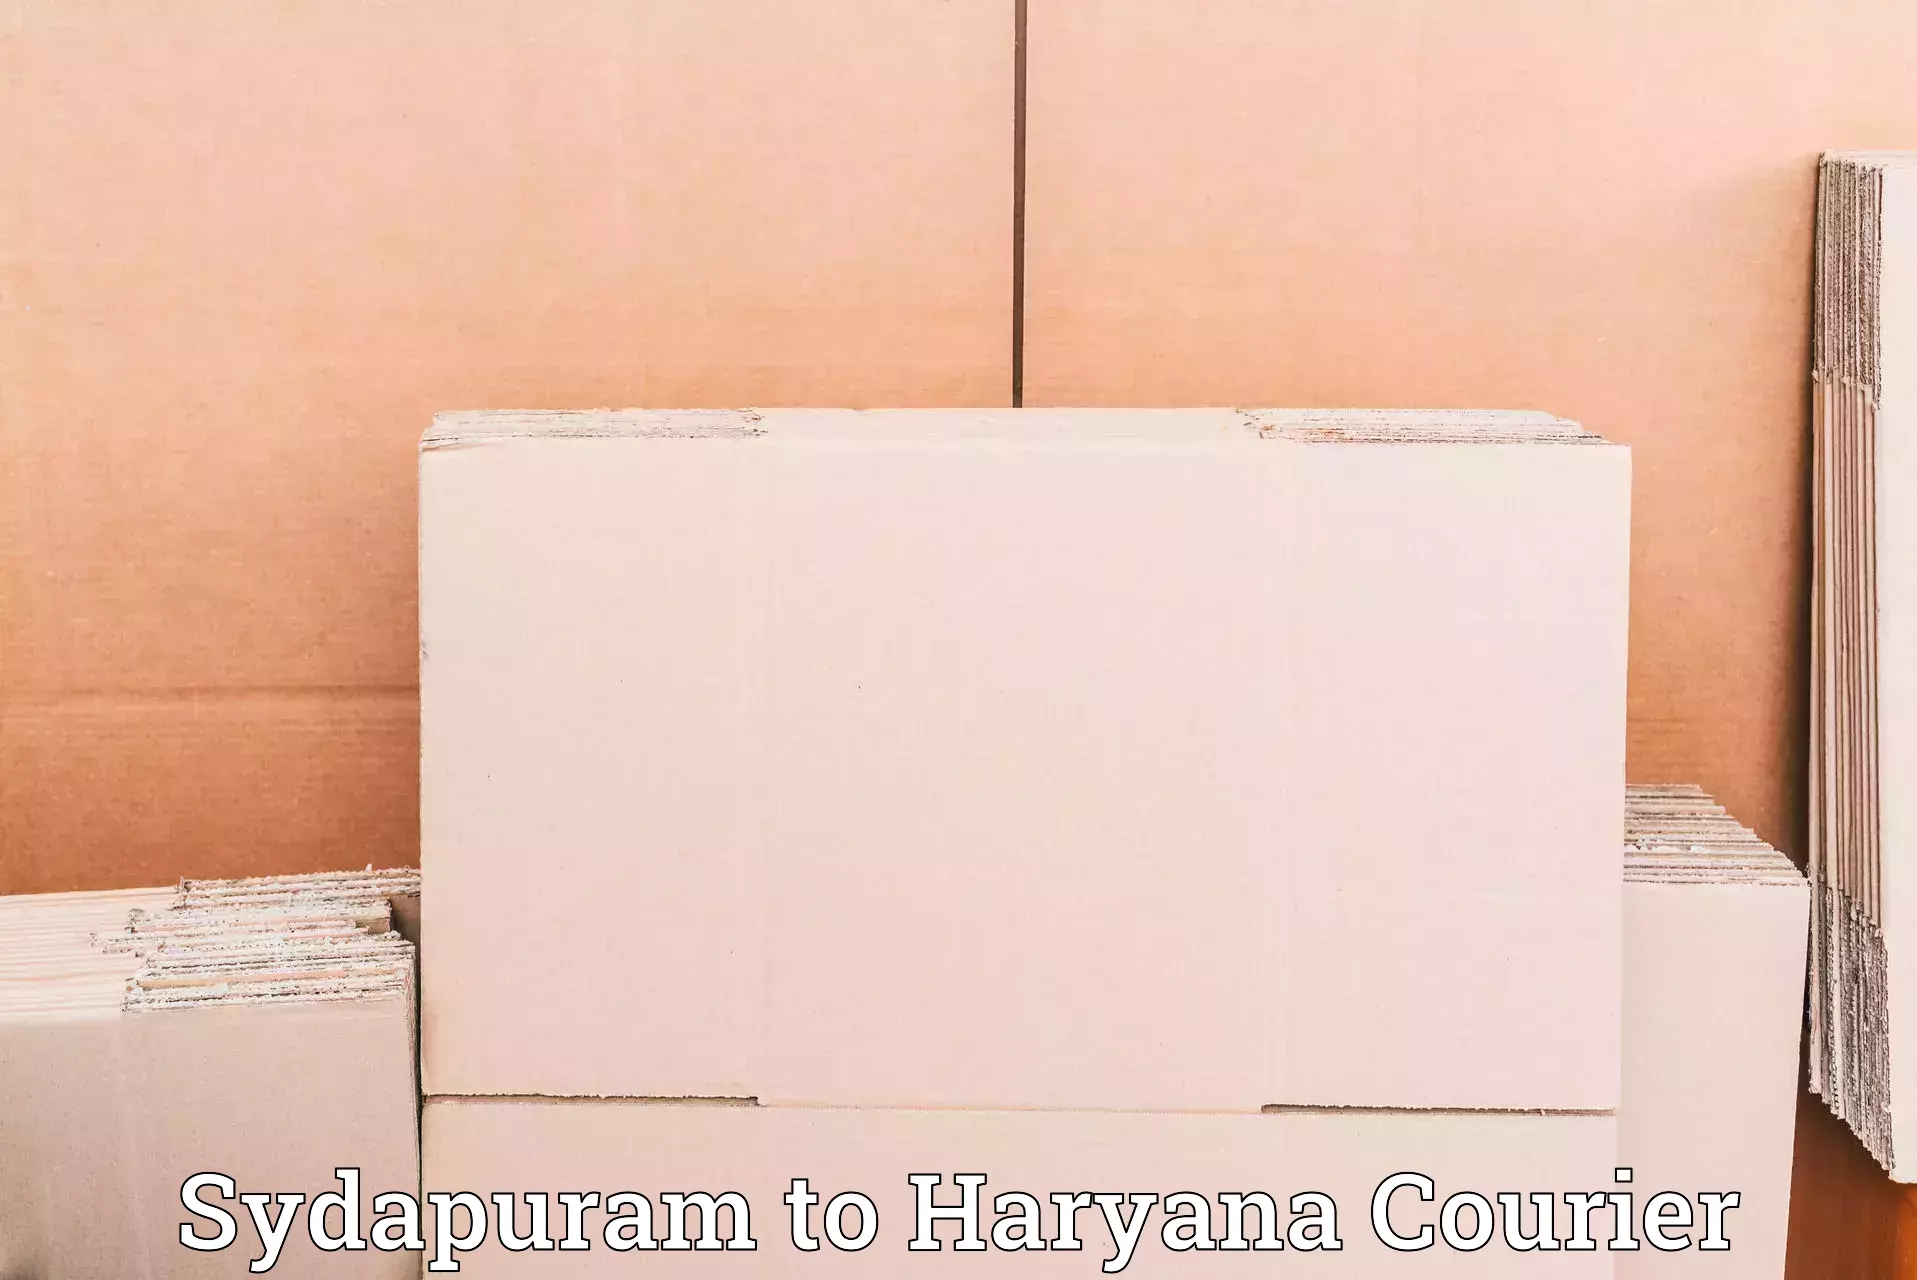 Courier service booking Sydapuram to Chaudhary Charan Singh Haryana Agricultural University Hisar